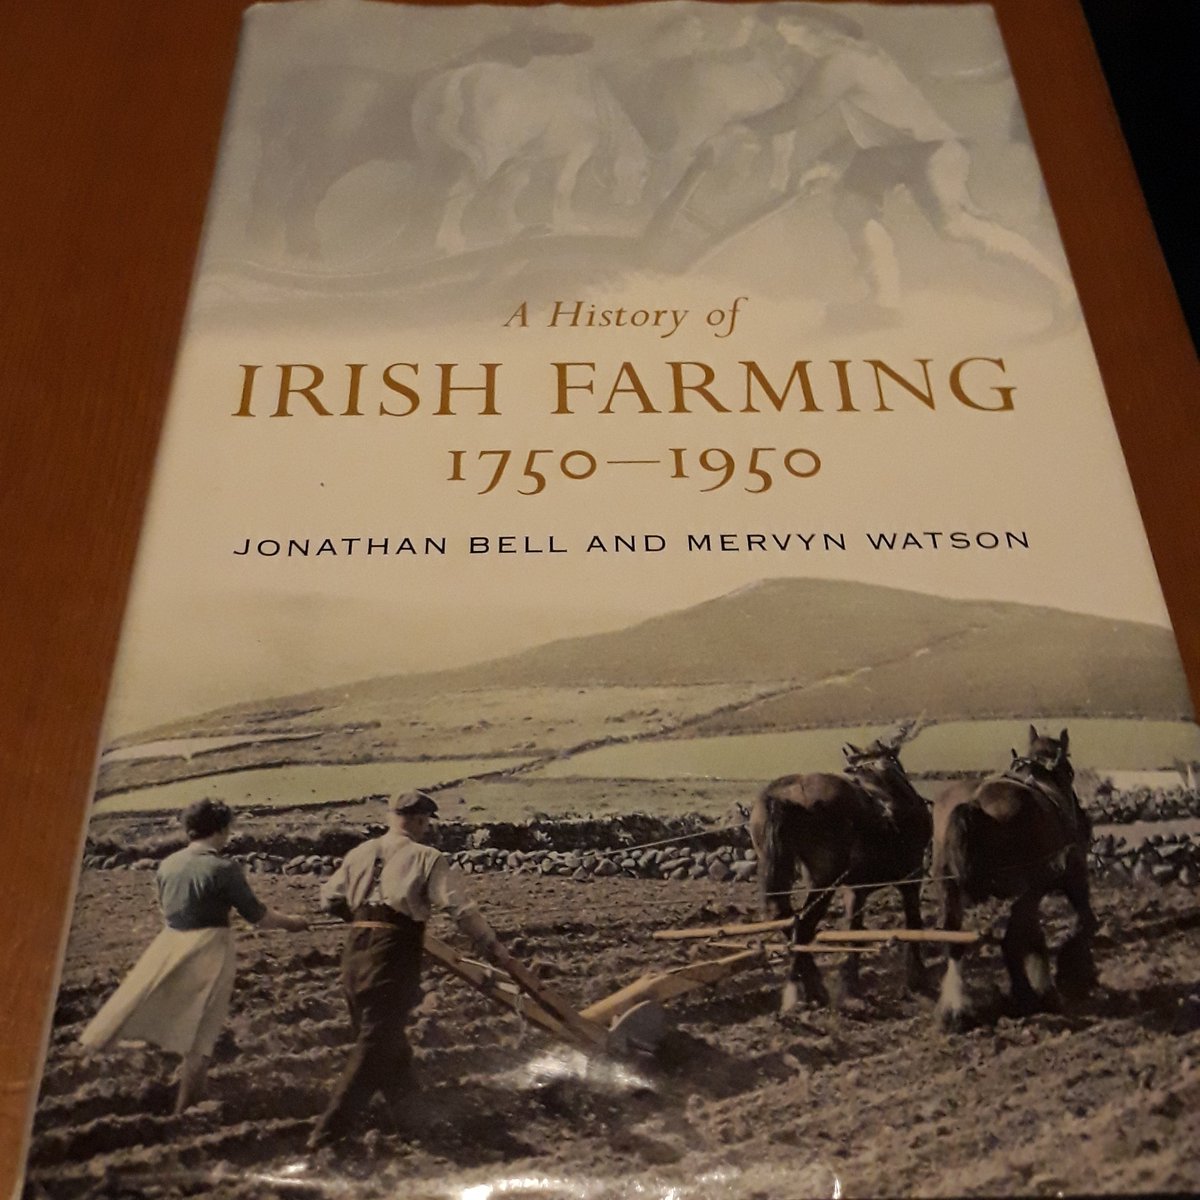 2. My source. Obviously one book is not wide ranging but it's good for referencing Irish agriculture practice of bygone times